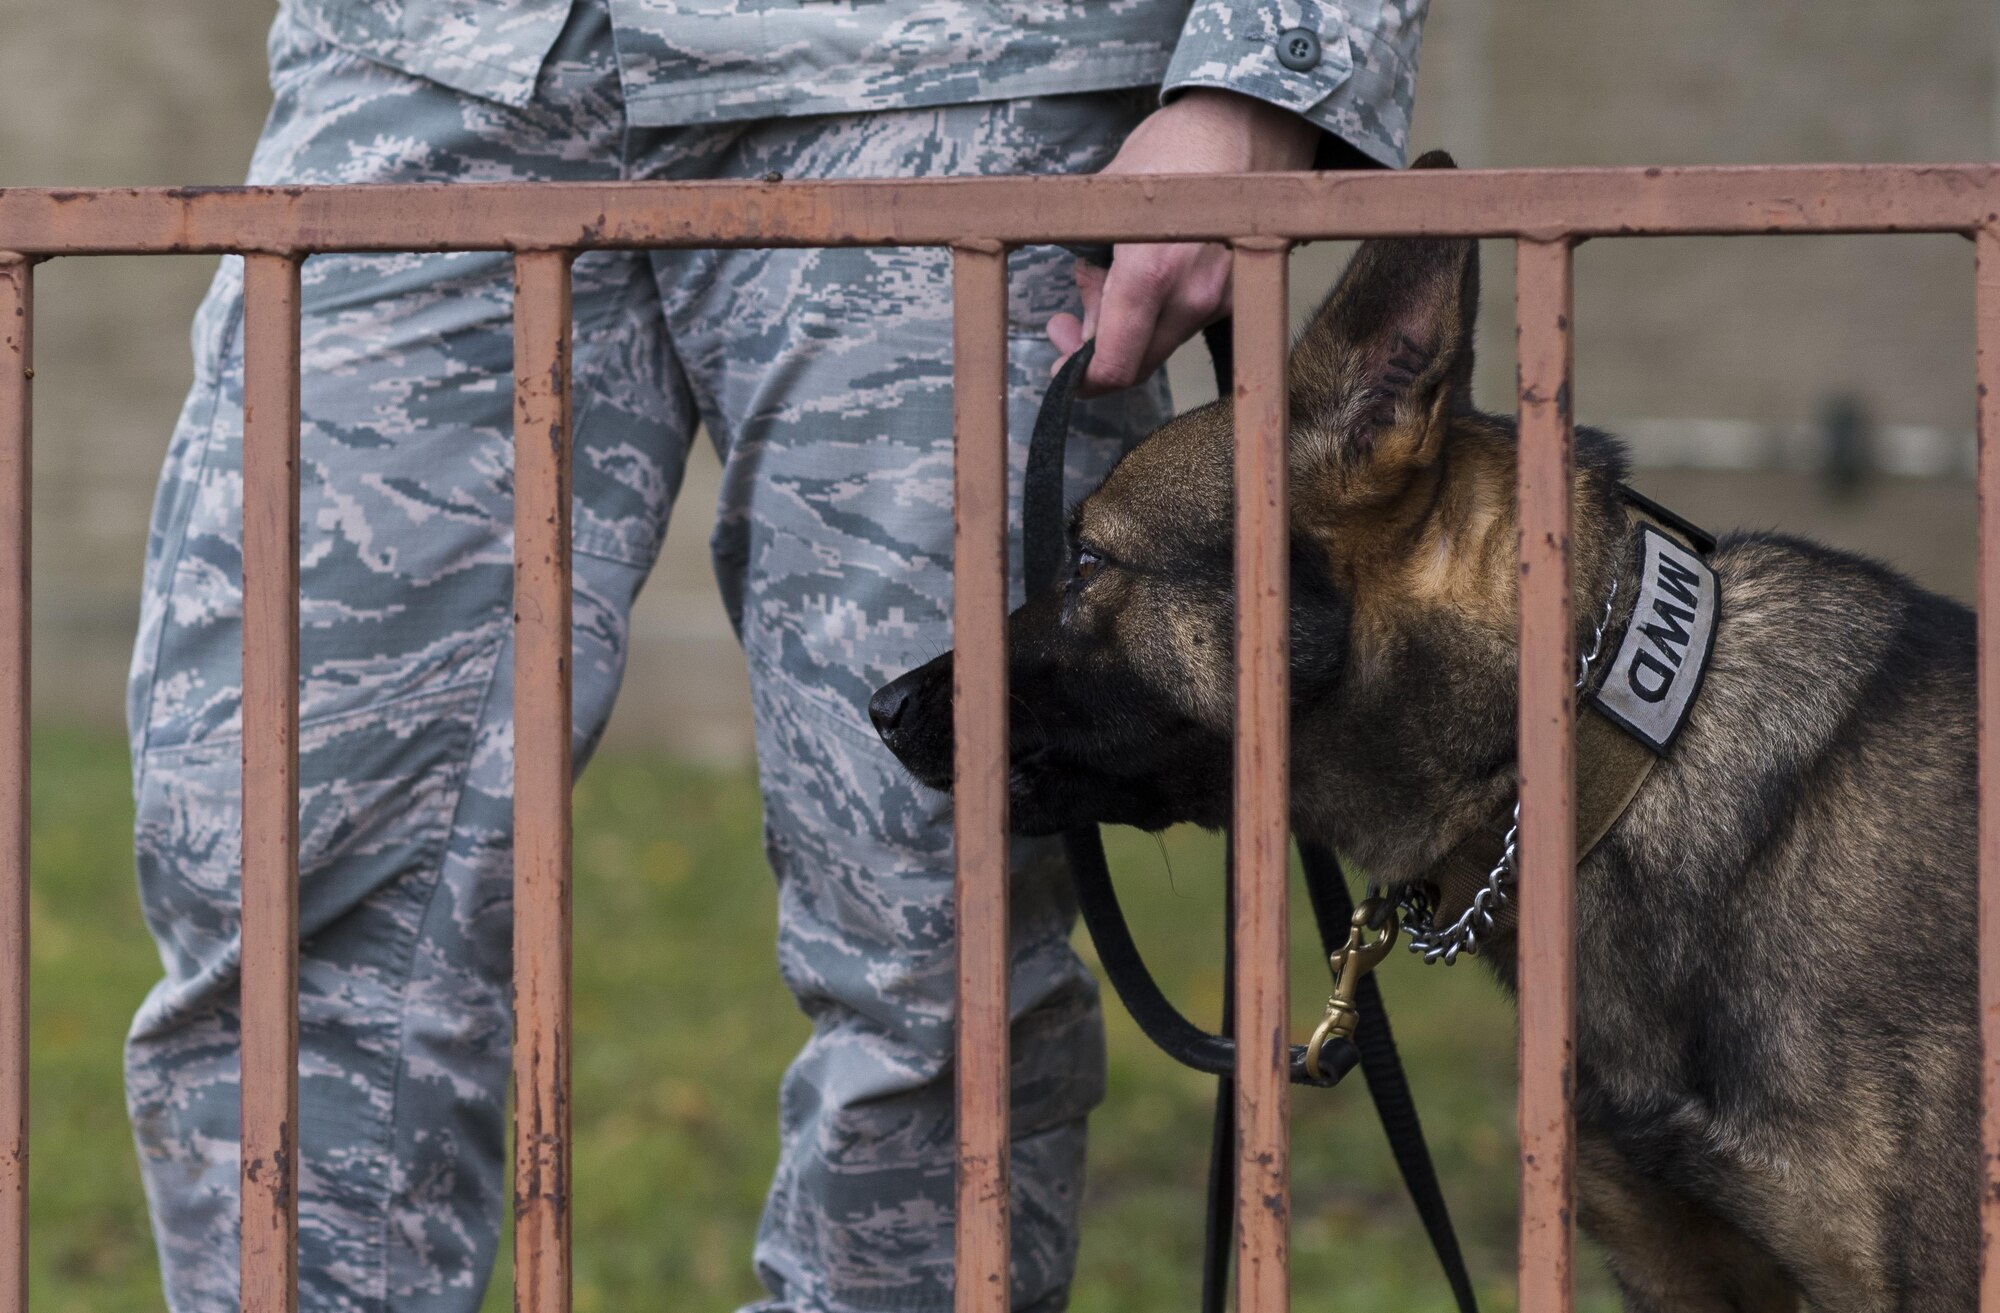 Senior Airman Jordan Crouse, 2nd Security Forces military working dog handler, and Hektor, 2nd SFS MWD, guard a security perimeter during an active shooter exercise at Barksdale Air Force Base, La., Nov. 29, 2016. Crouse and Hektor performed a security sweep, searching for bomb-making material. (U.S. Air Force photo/Senior Airman Damon Kasberg)